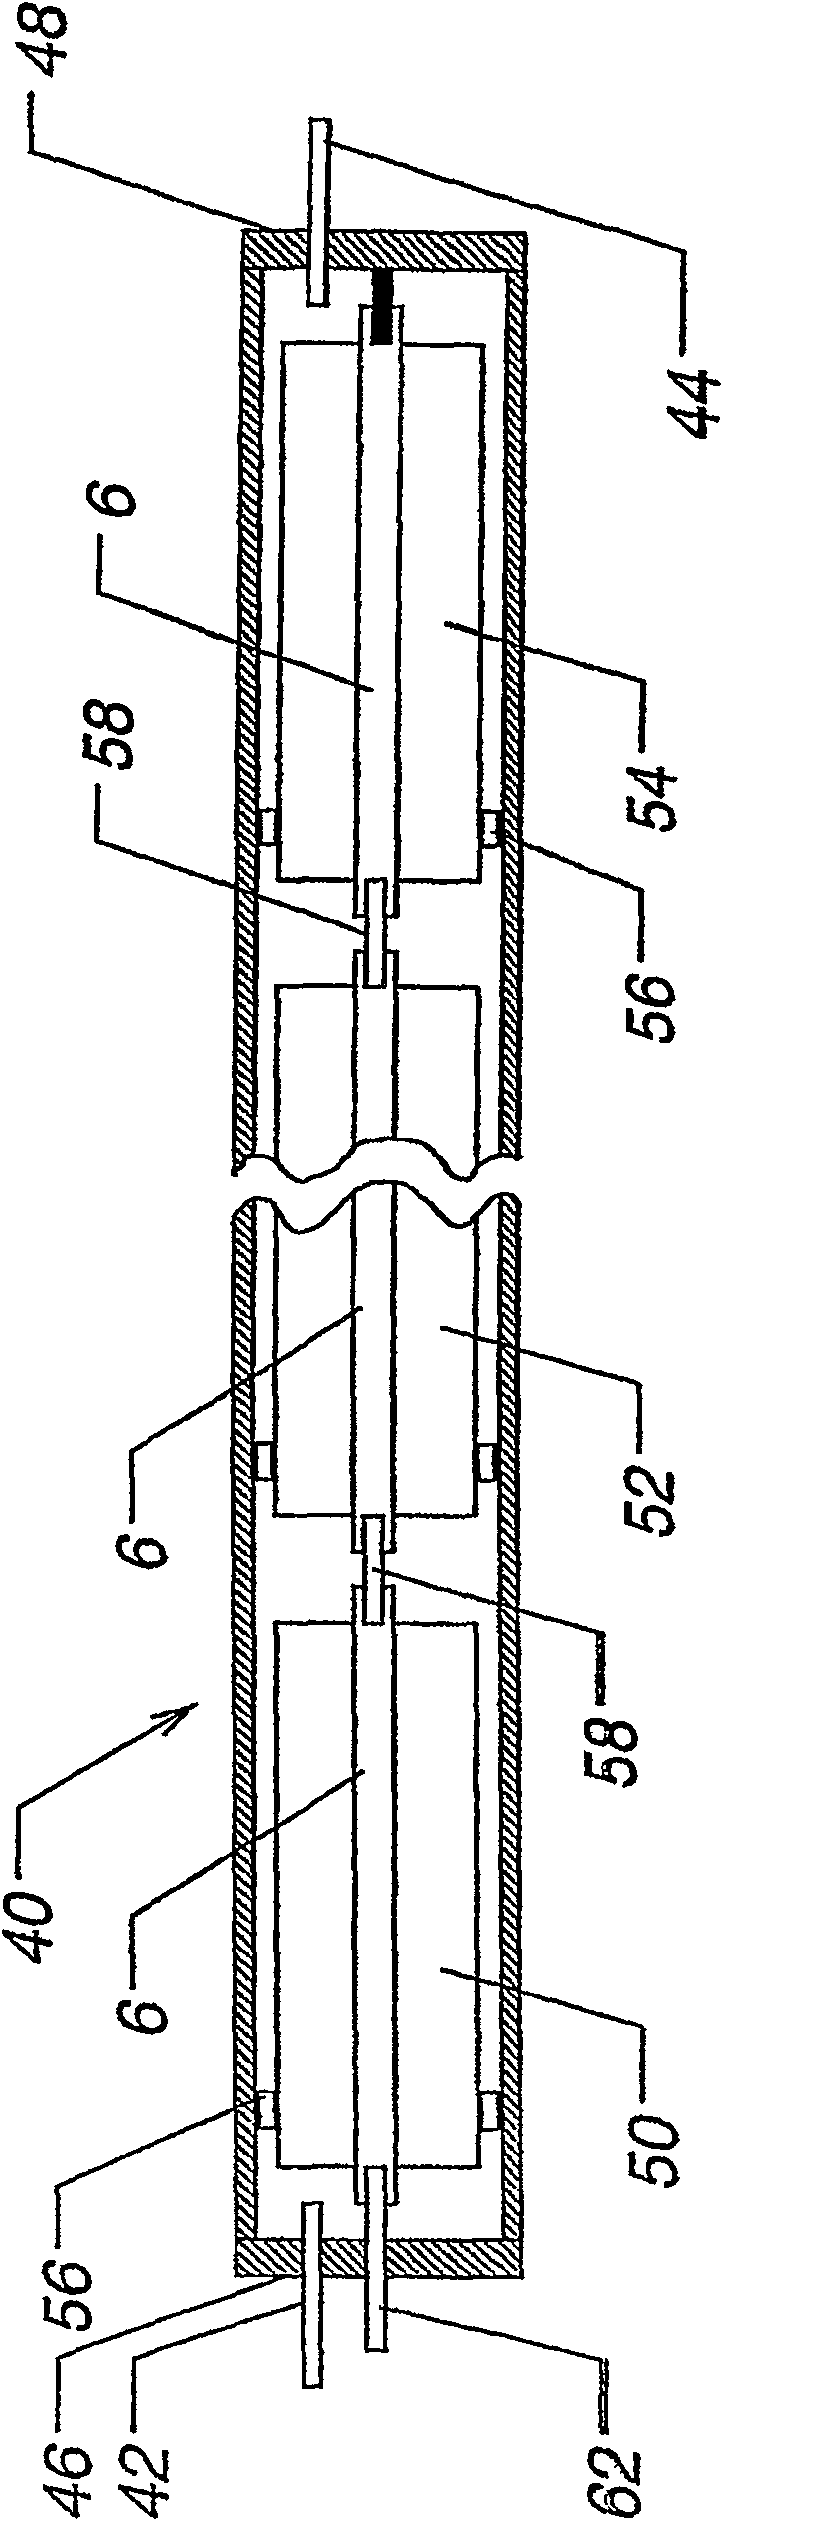 Apparatus for treating solutions with high osmotic strength